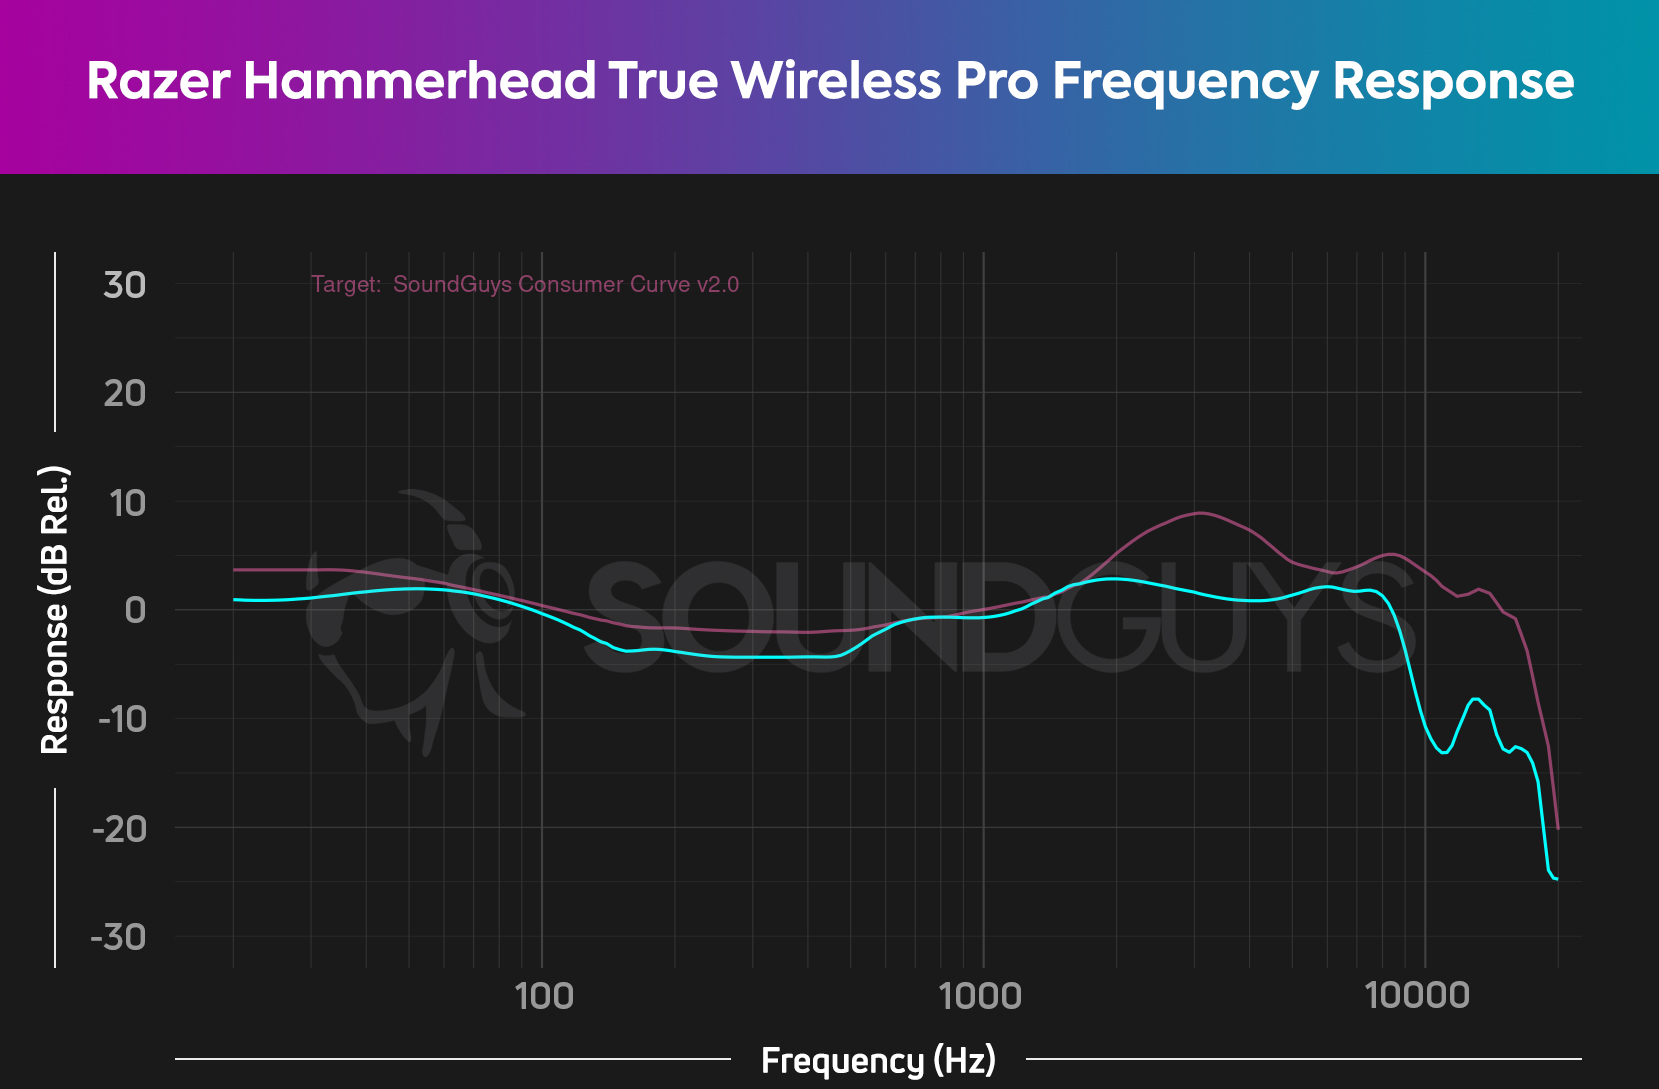 A chart depicts the Razer Hammerhead True Wireless Pro's frequency response which is relatively accurate across the frequency spectrum.